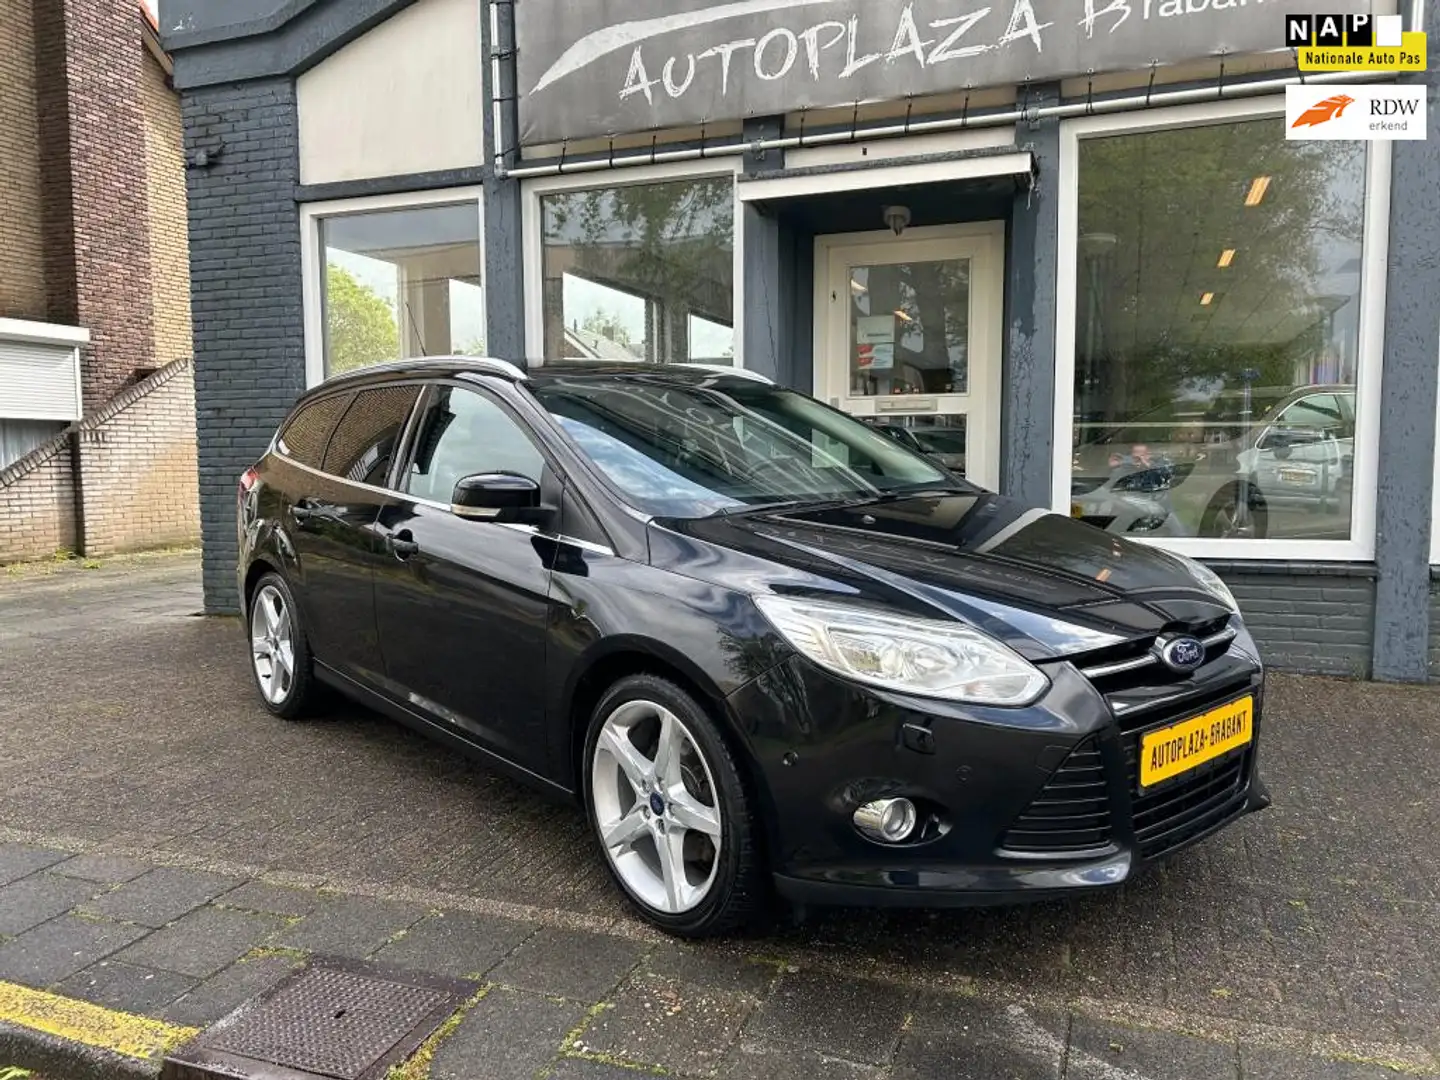 Ford Focus Wagon 1.6 EcoBoost 182 PK/ CRUISE/ CLIMA/ PDC/ 18 Zwart - 1